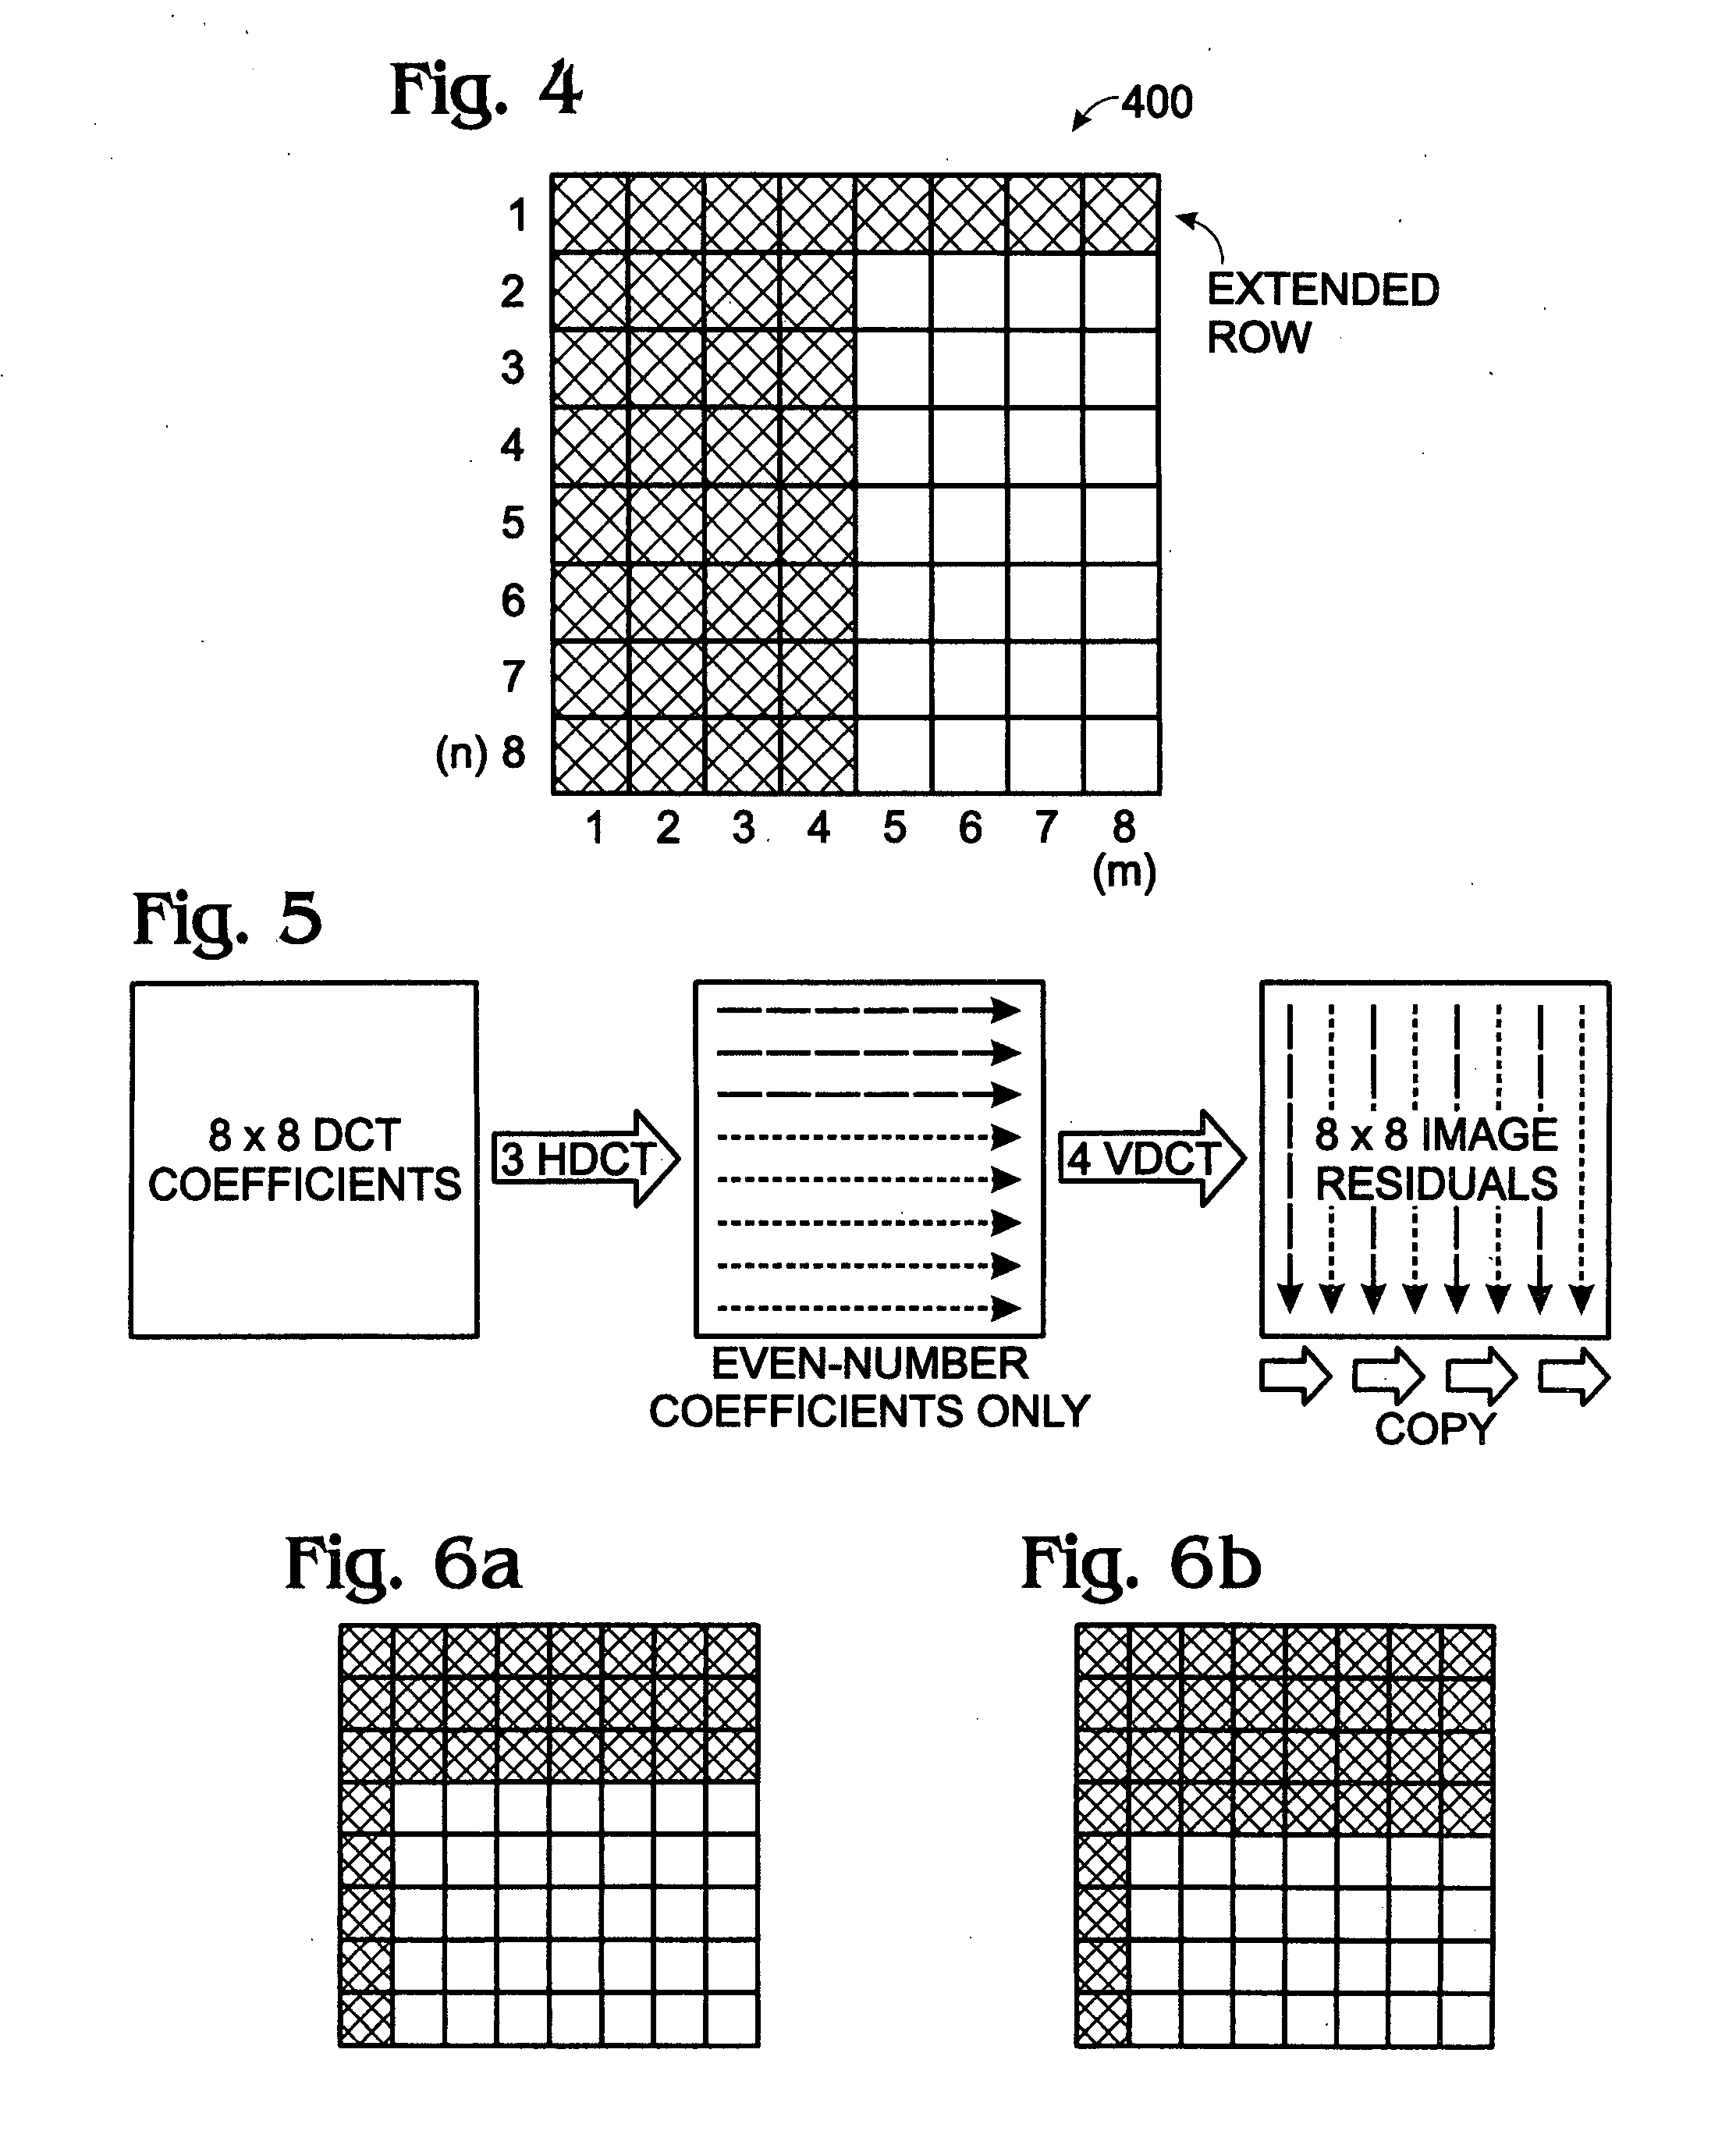 Method for reducting IDCT calculations in video decoding